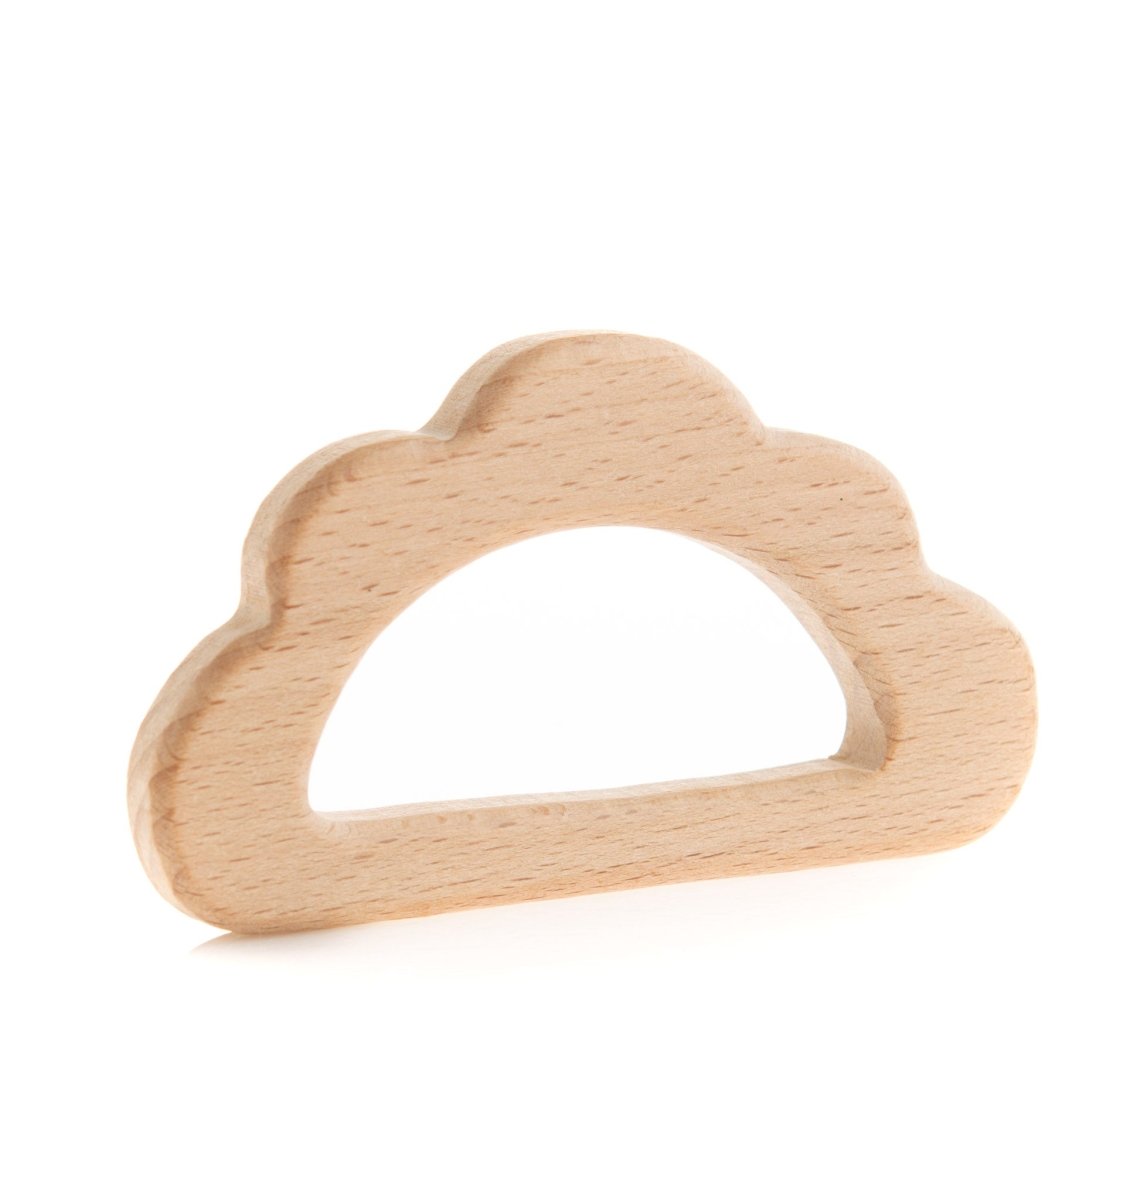 Wood Rings & Pendants Large - Beech Wood Cloud from Cara & Co Craft Supply